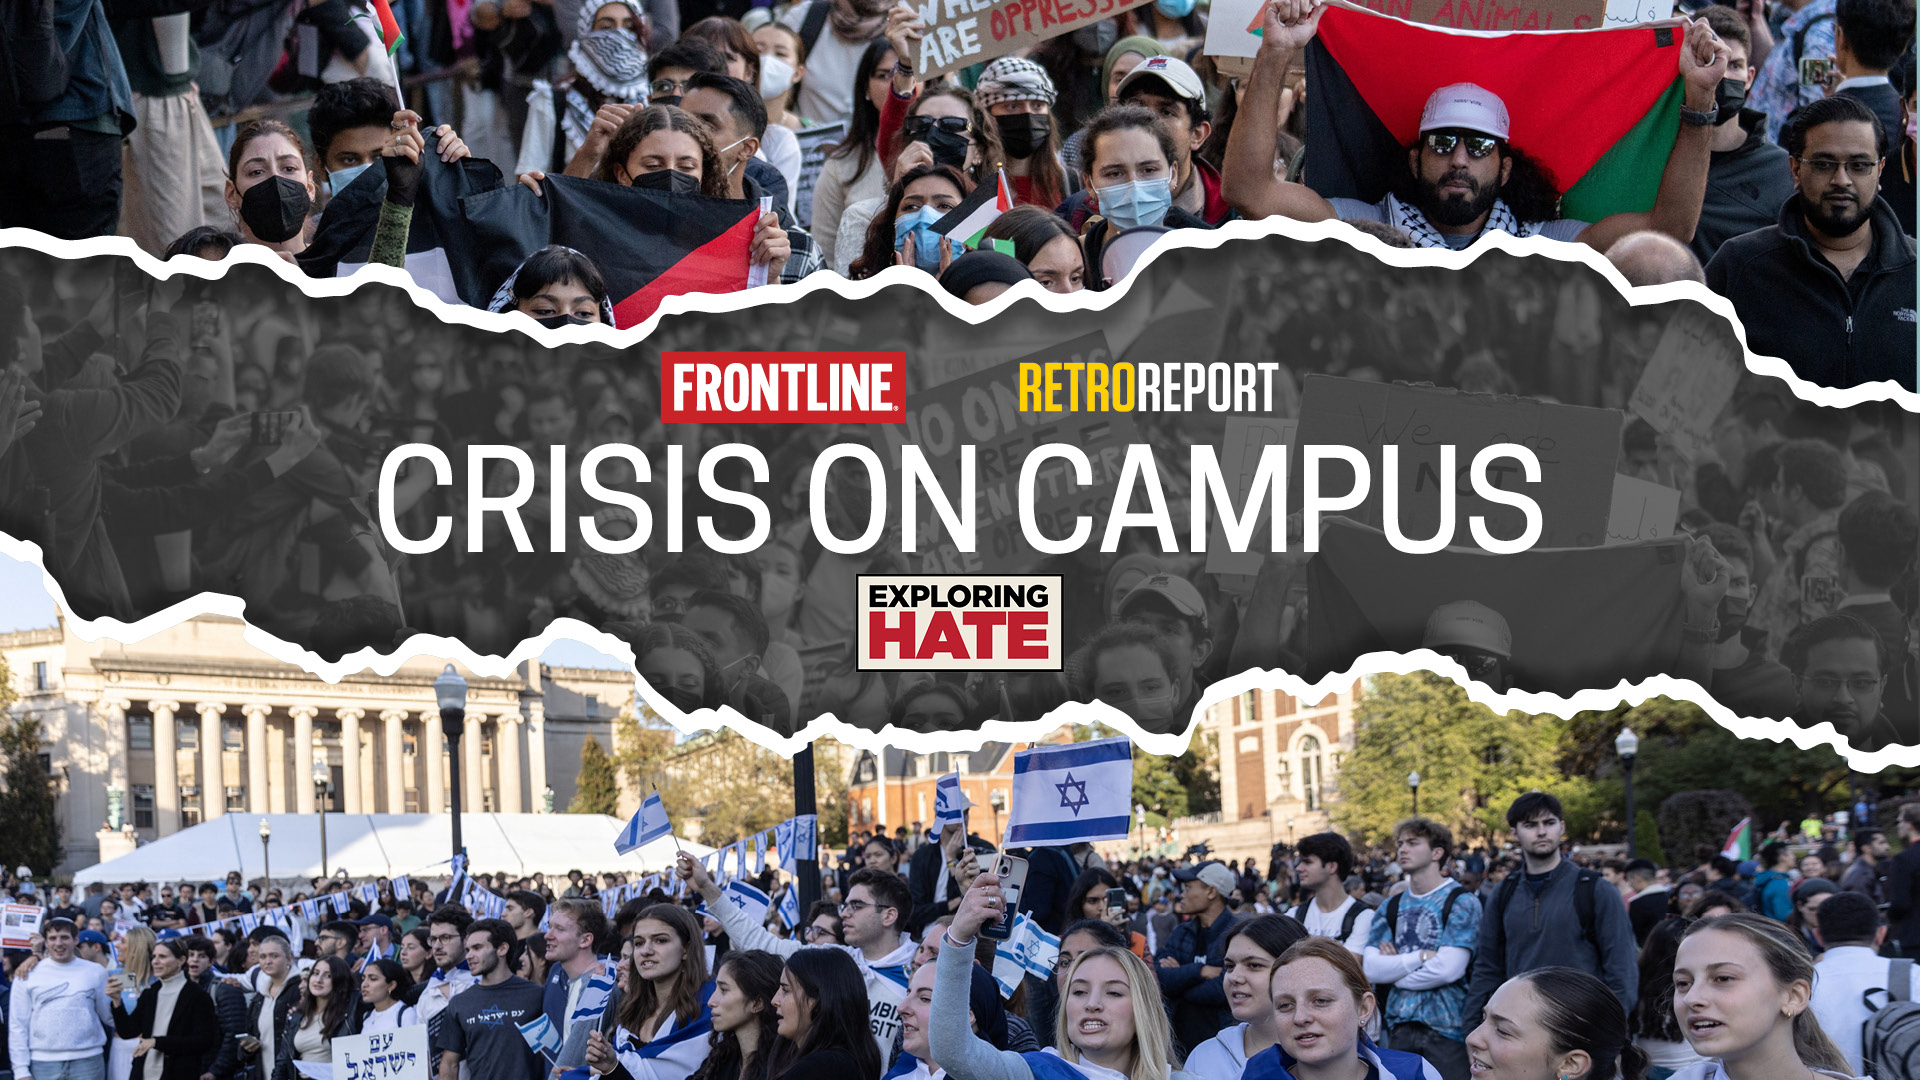 Frontline: Crisis on Campus